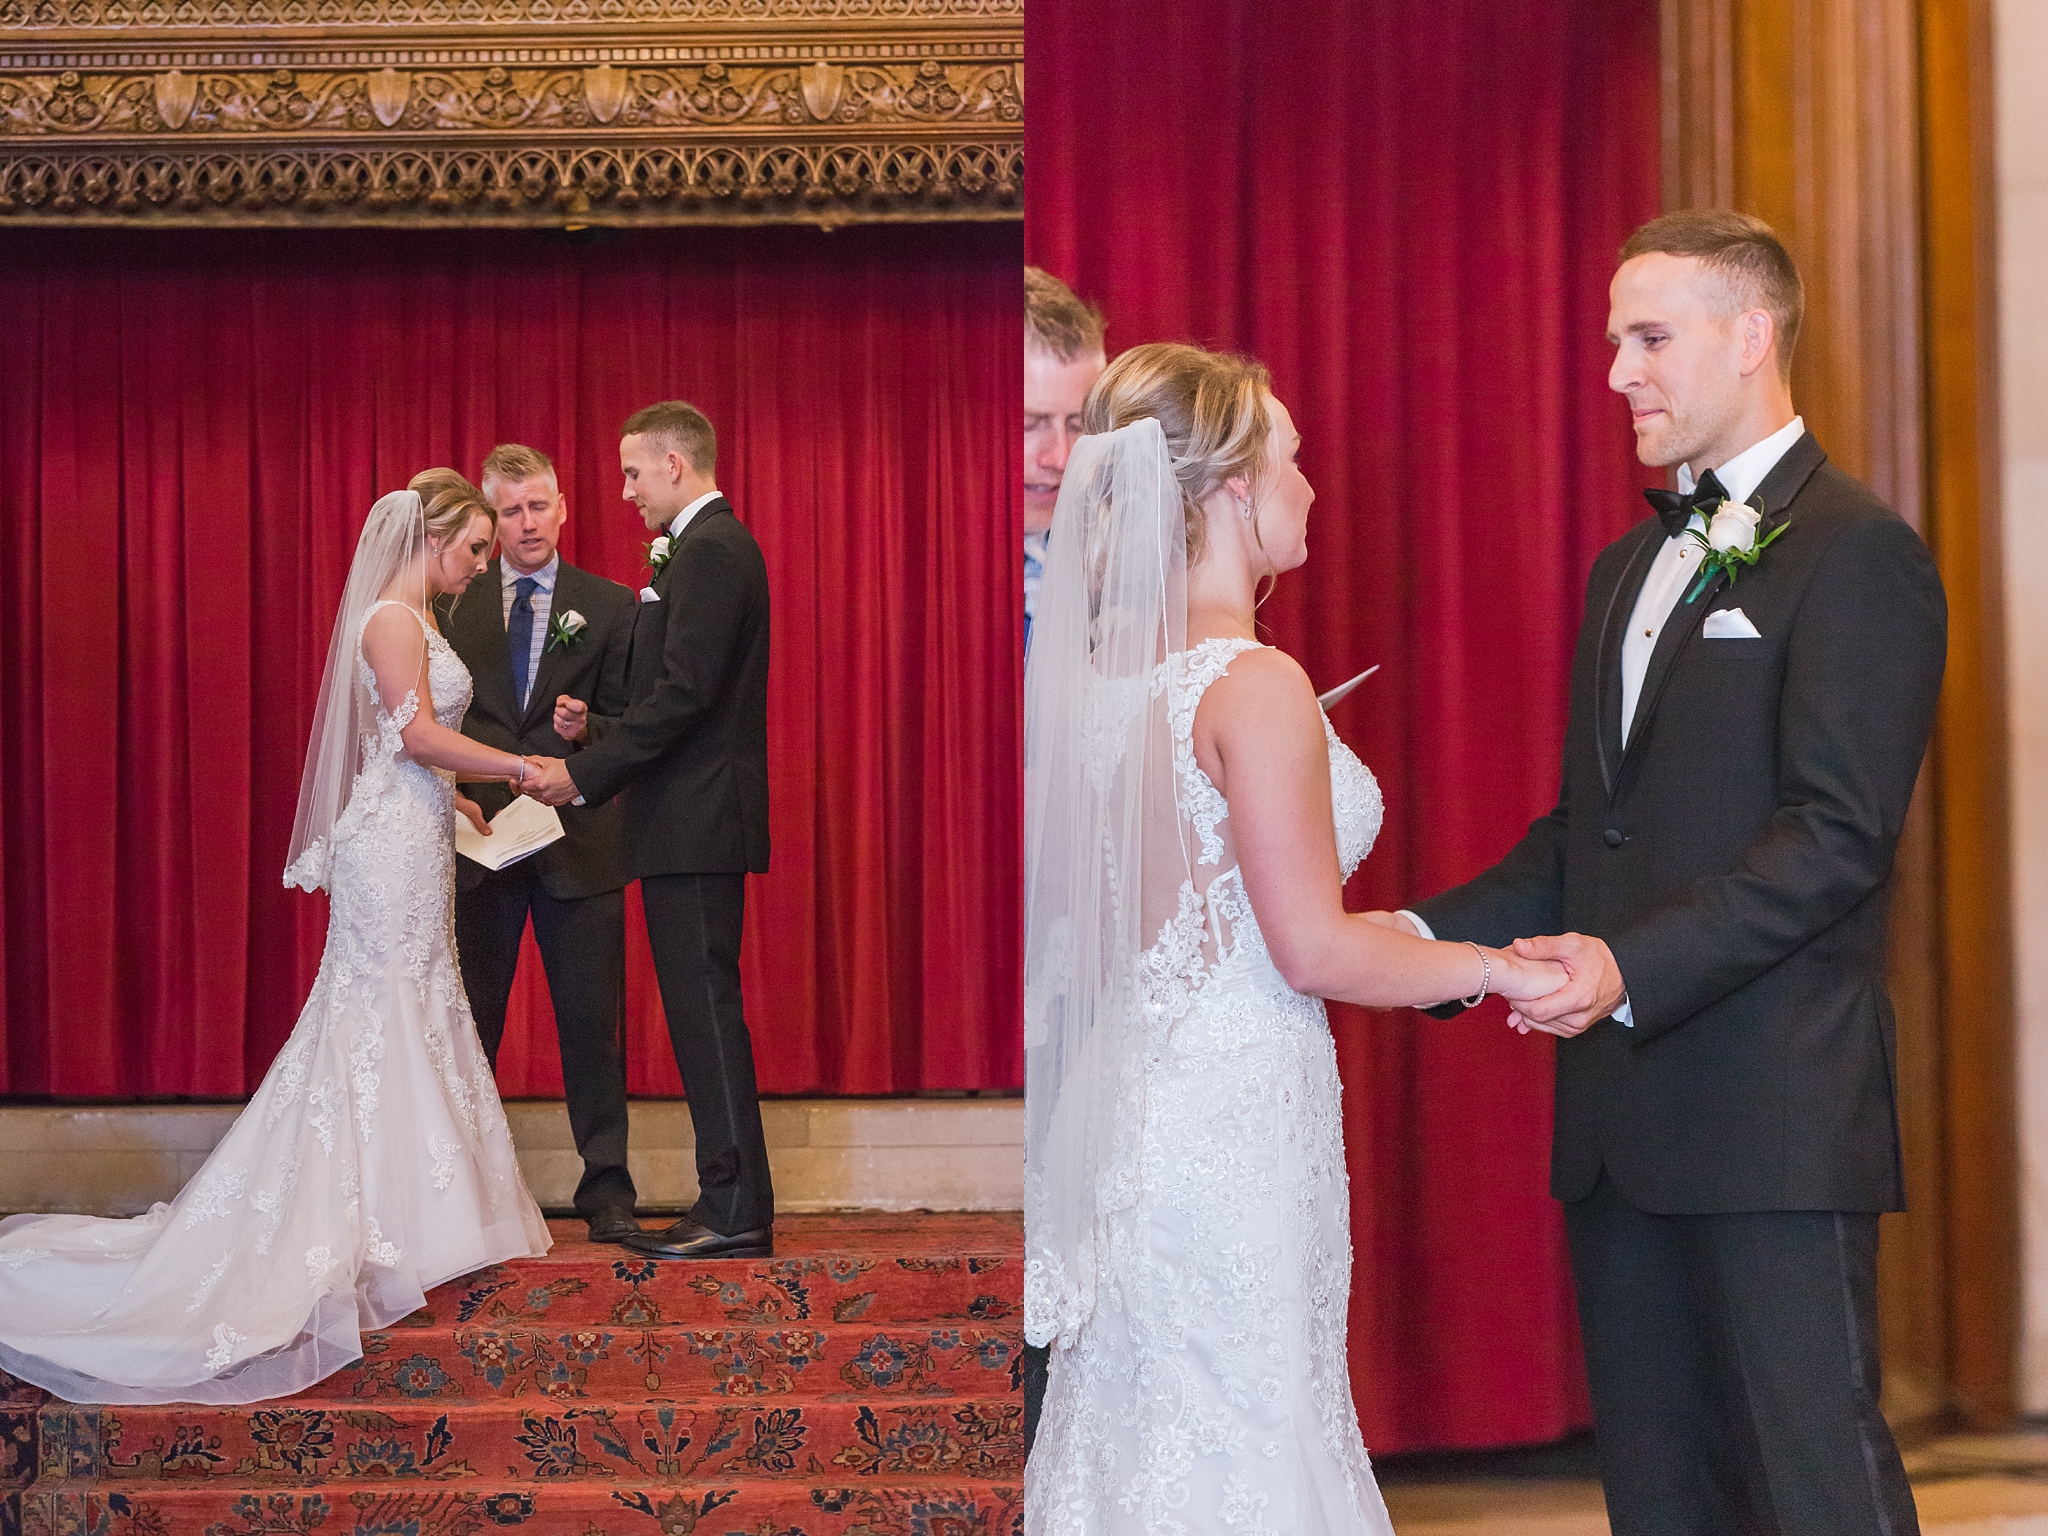 candid-romantic-wedding-photos-at-the-masonic-temple-belle-isle-detroit-institute-of-arts-in-detroit-michigan-by-courtney-carolyn-photography_0075.jpg